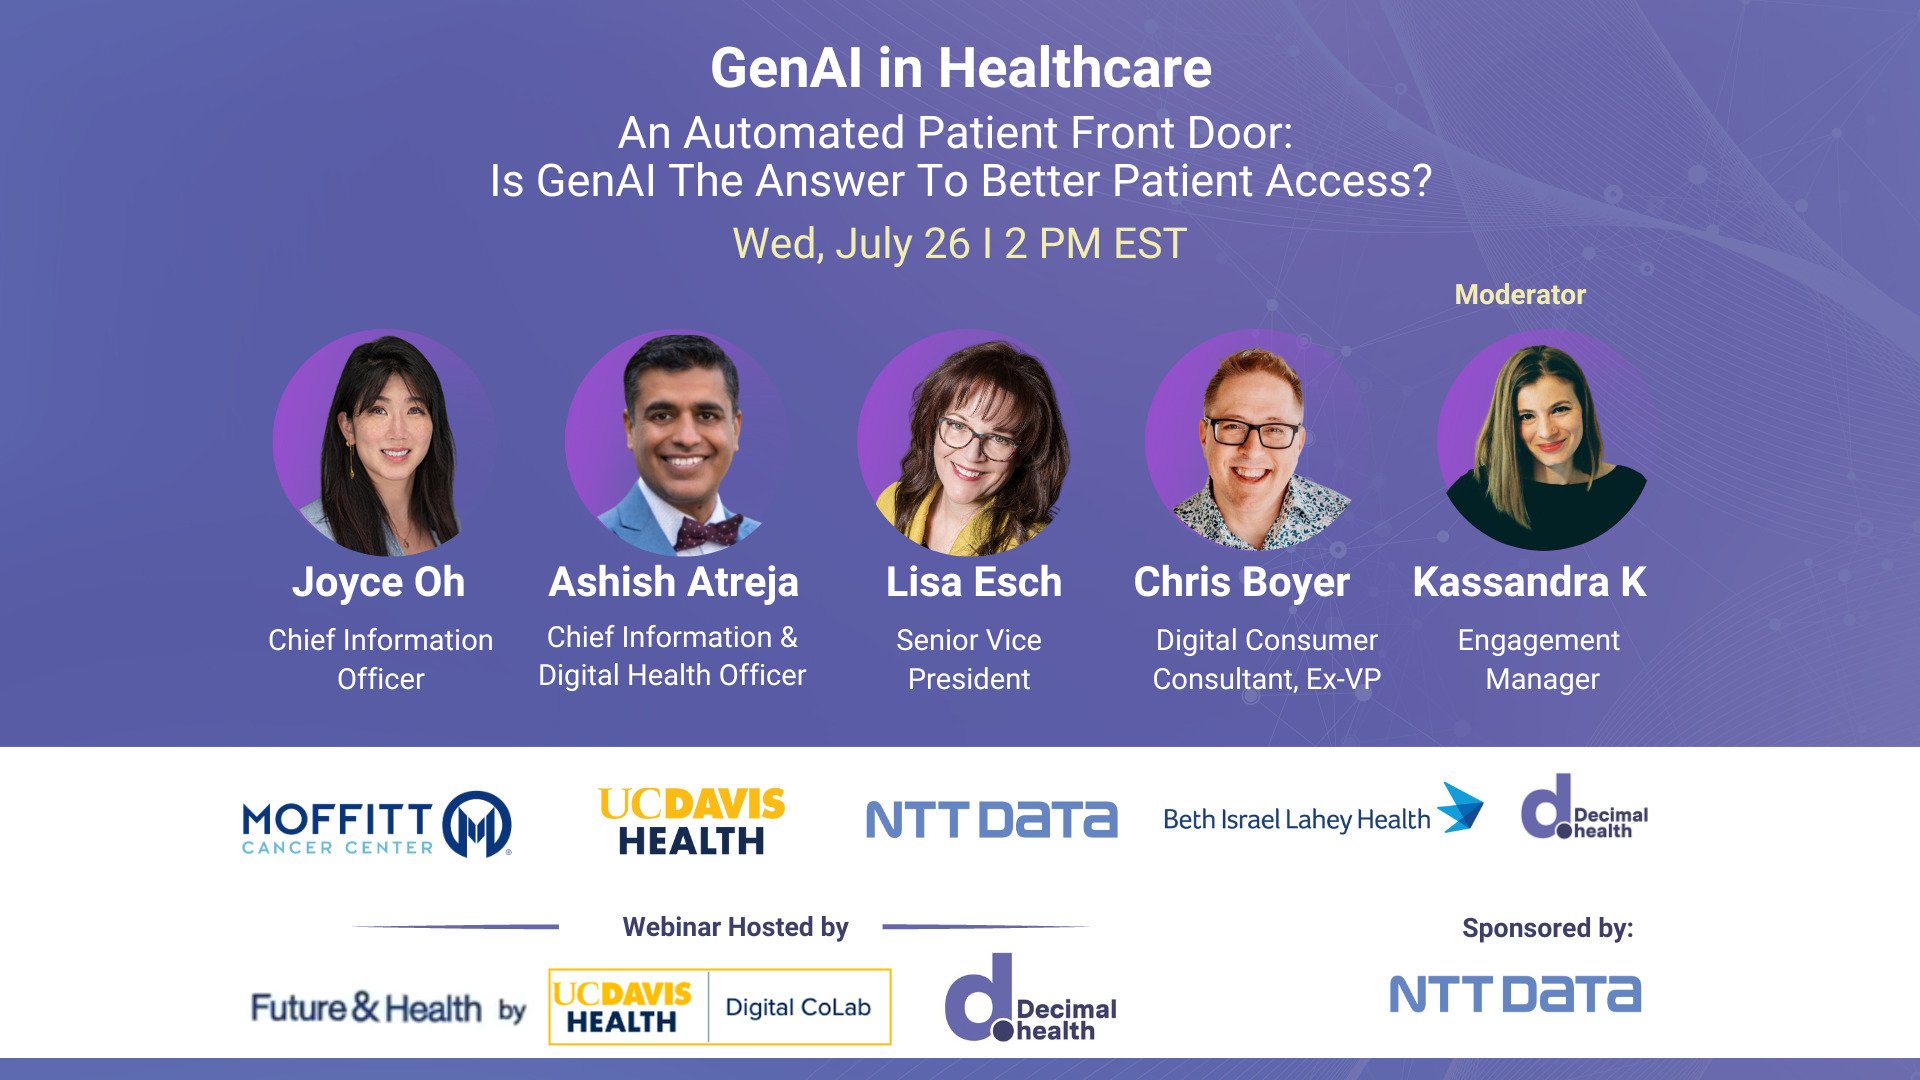 Automated Patient Front Door: Is Gen AI the Answer to Better Patient Access?